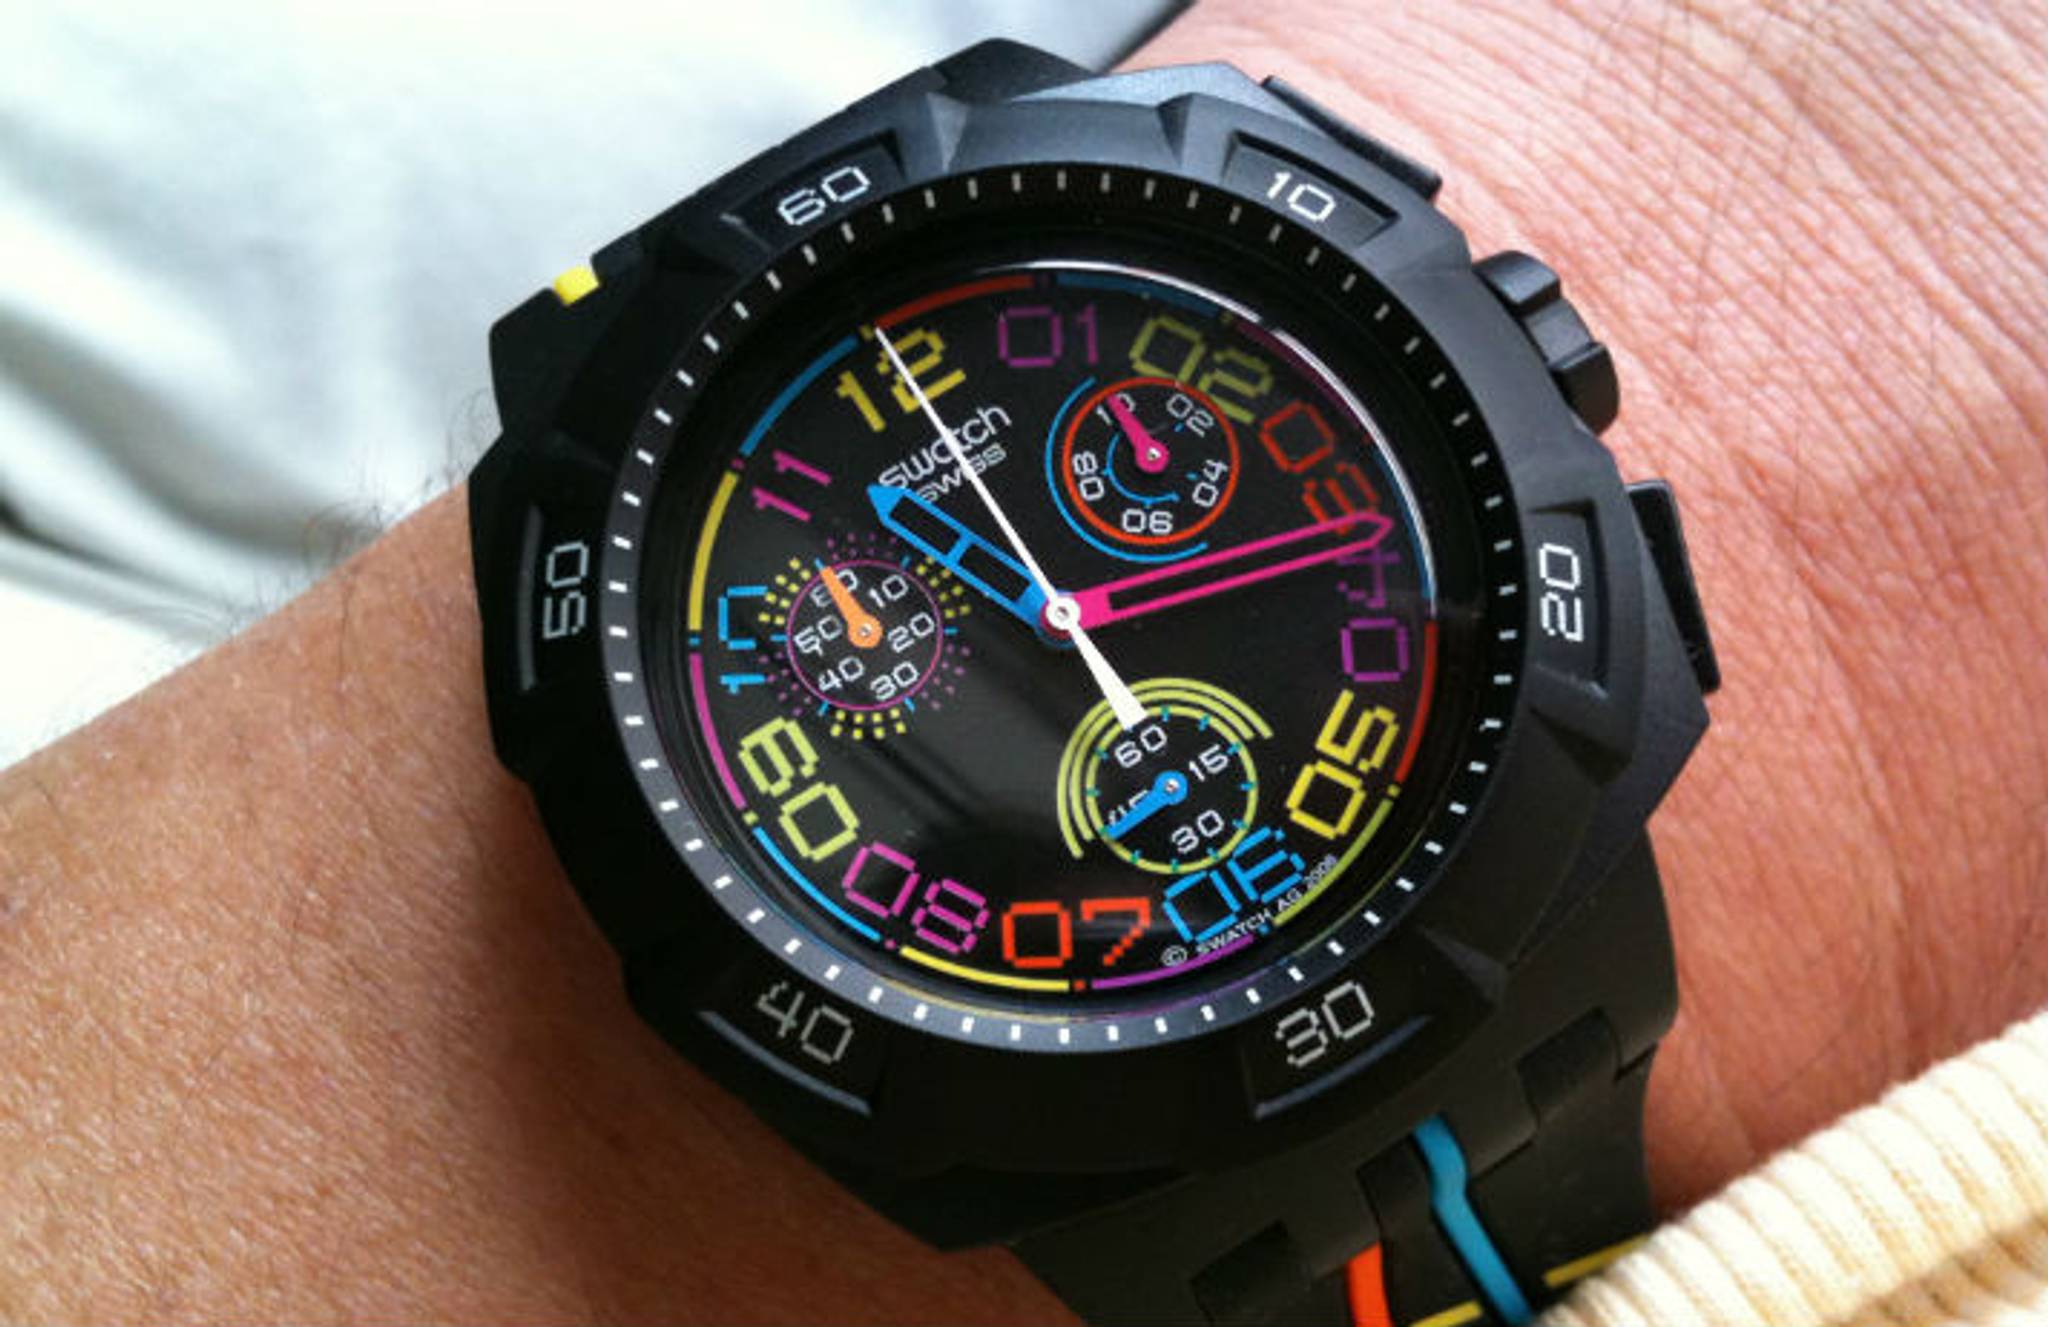 A smartwatch from Swatch